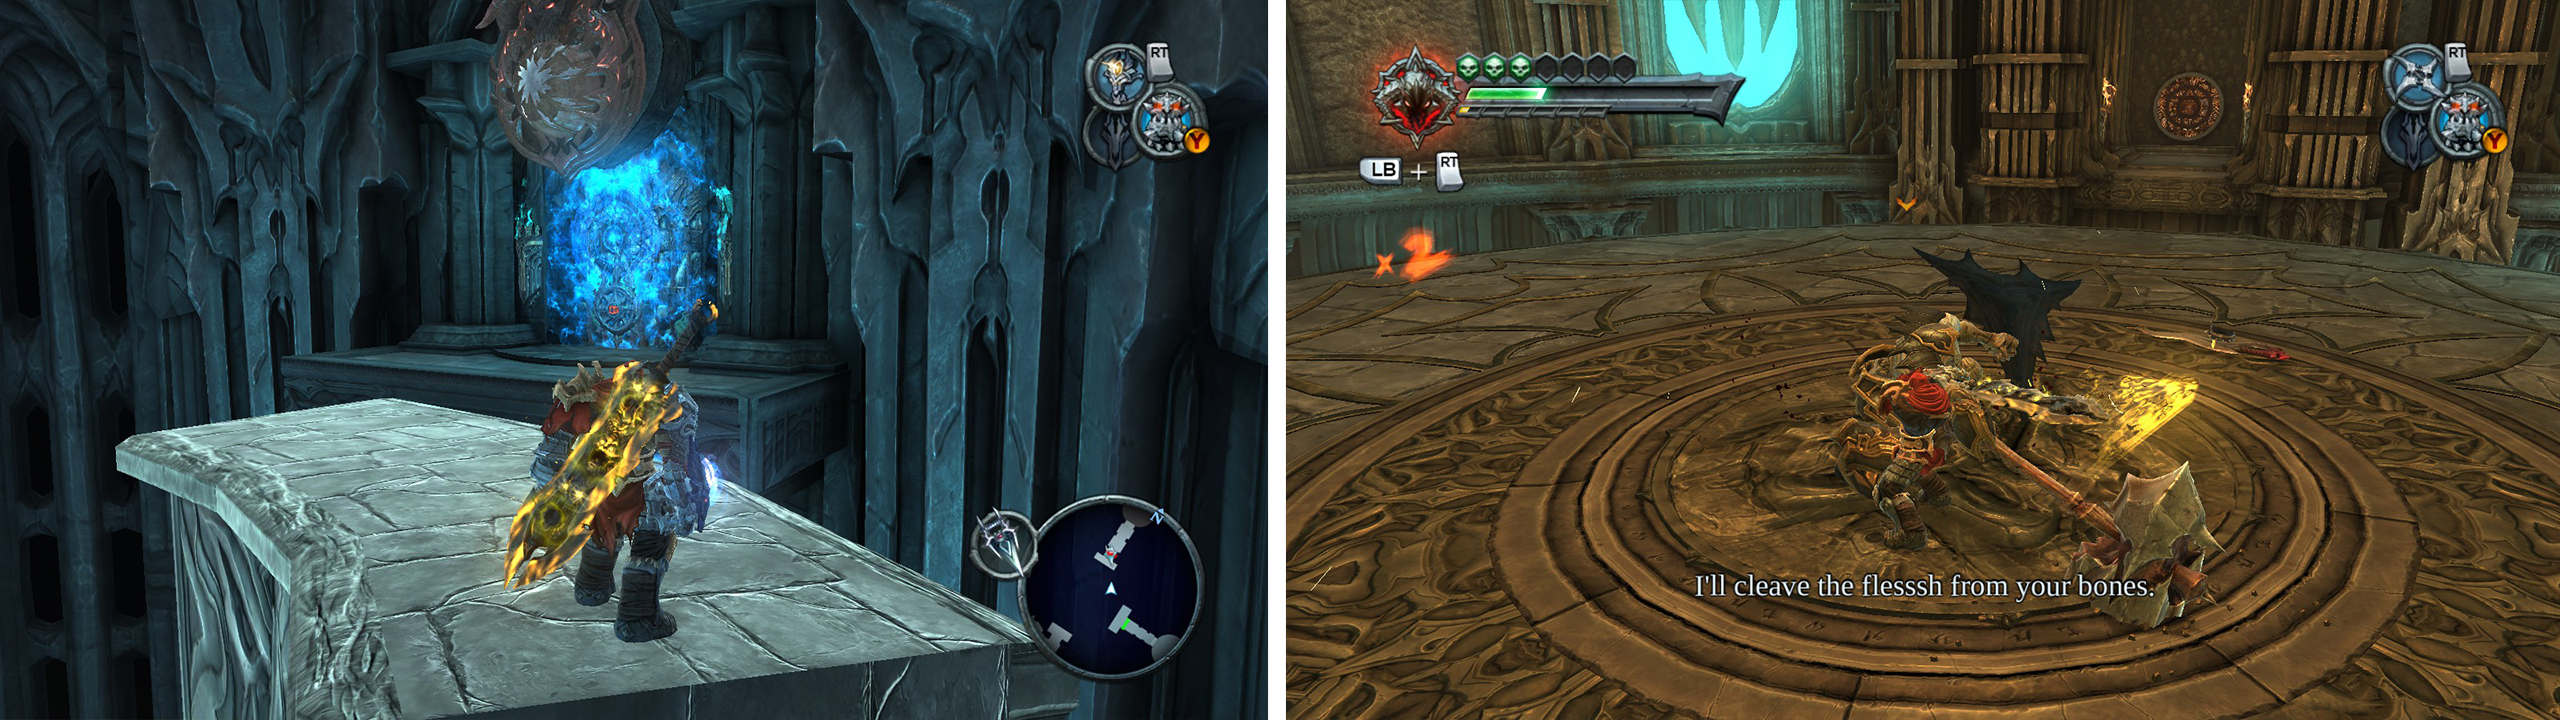 Climb to the top of the spinning rock cylinder and jump to the platform with the locked door (right). At the top of the lift fight off the enemies that appear (right).